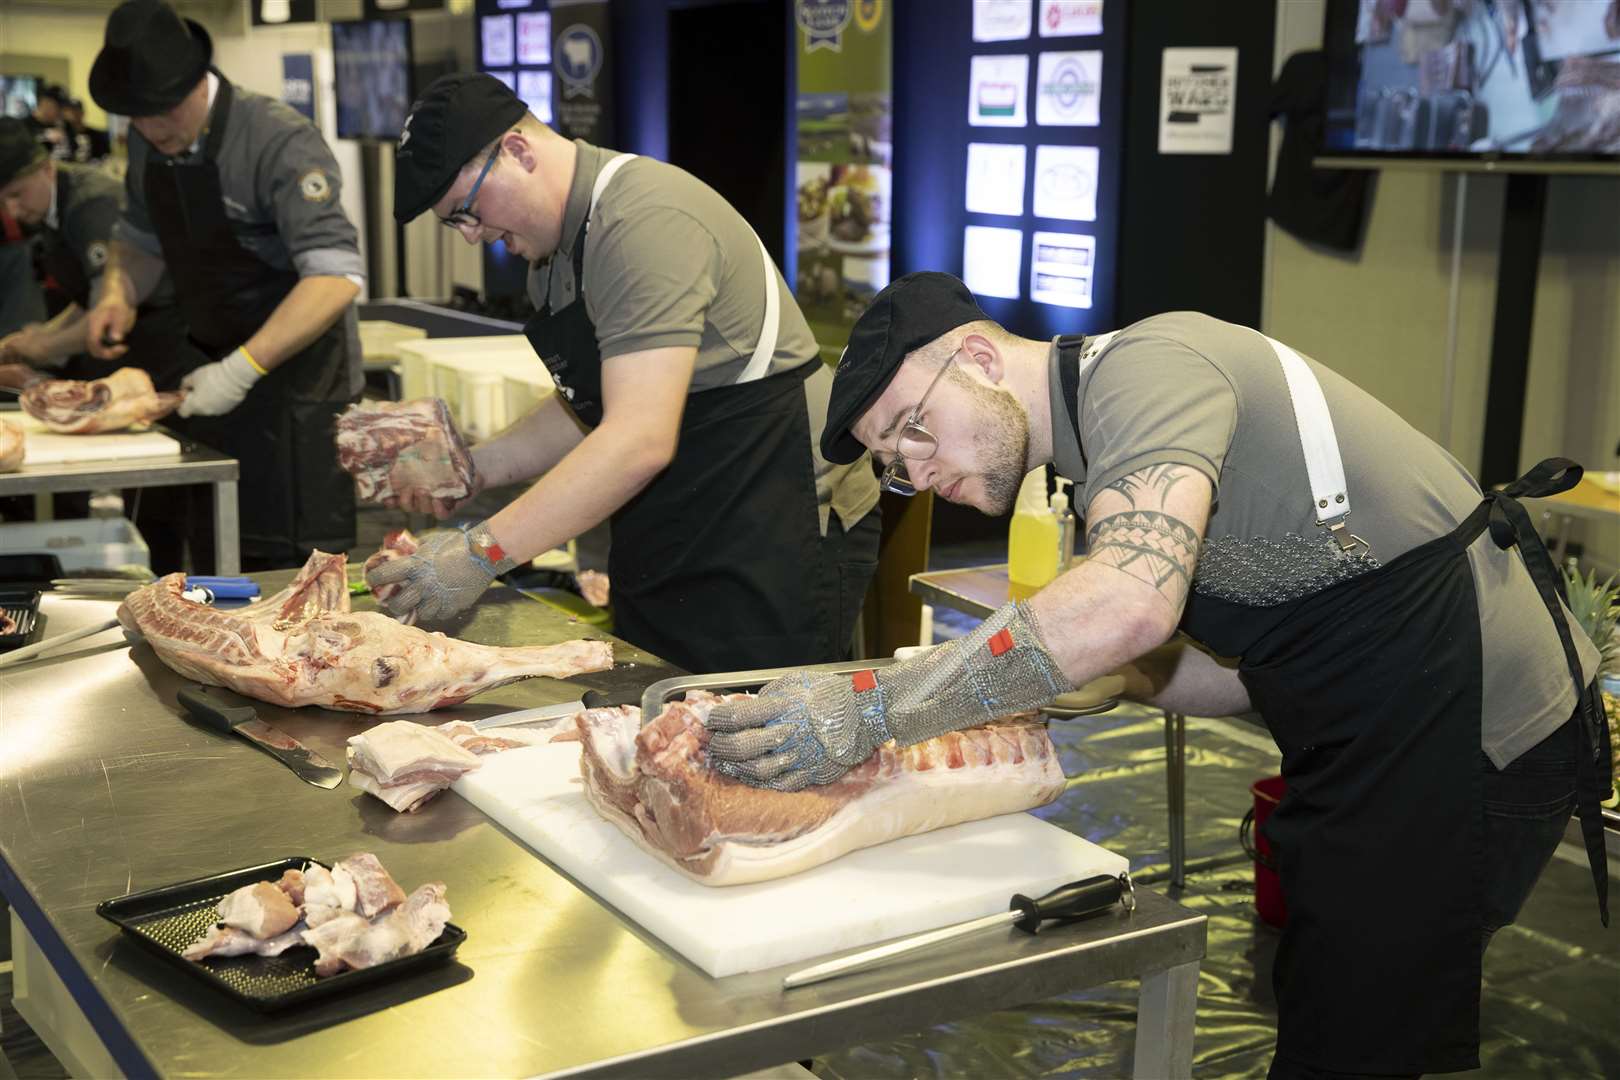 Banff butchers Scott Gillies and Ryan MacGillivray took part in the competition.